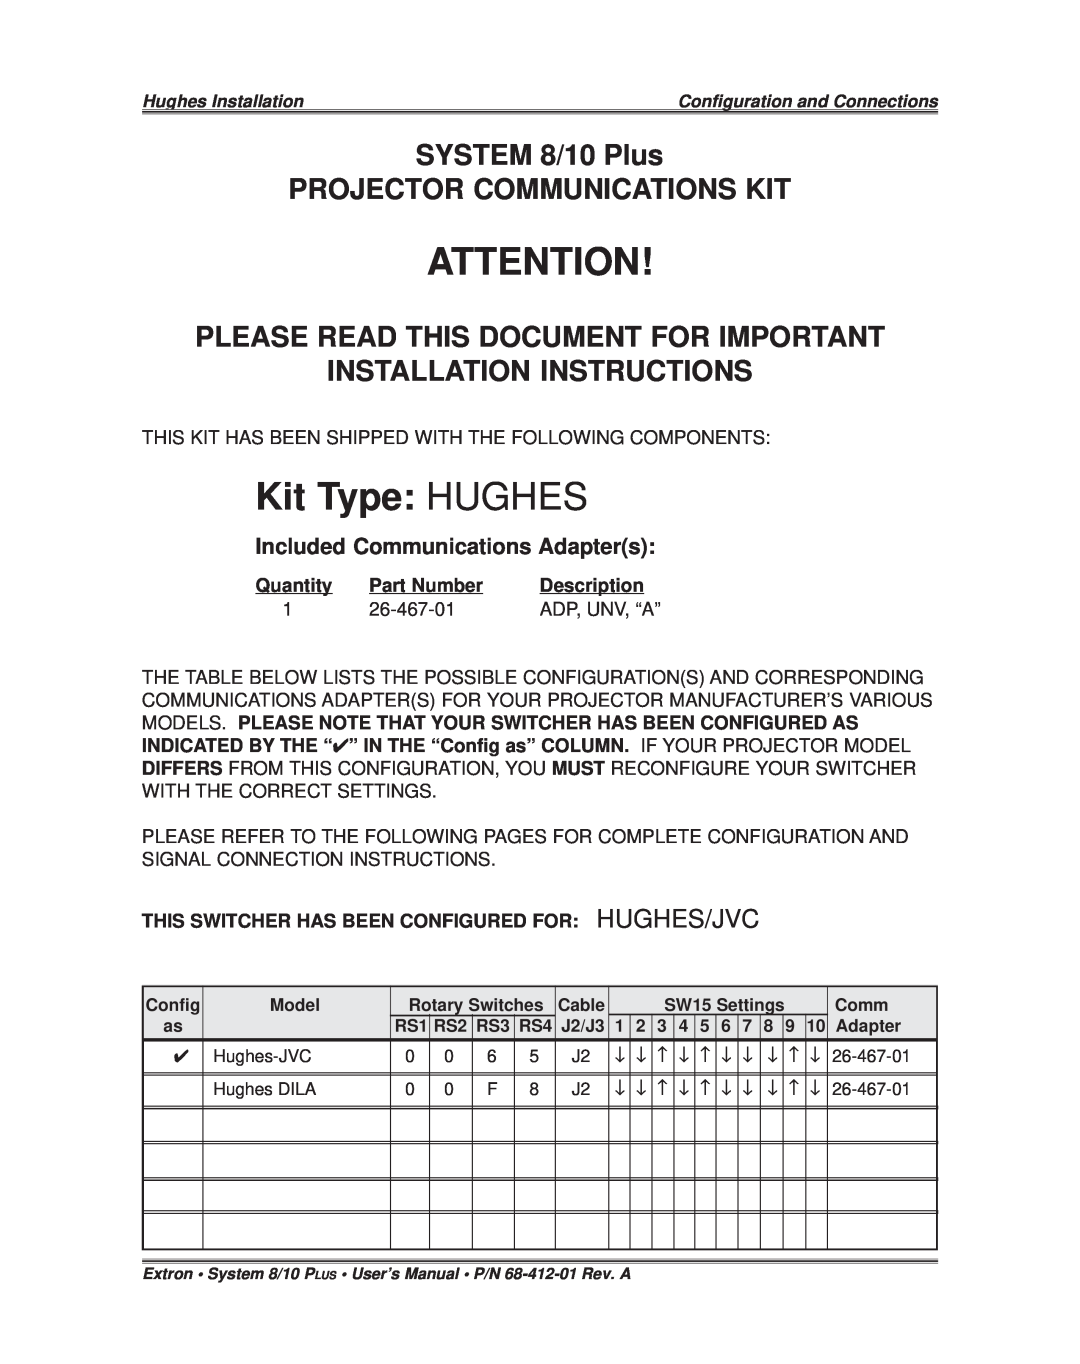 Extron electronic SYSTEM 8/10 PLUS installation instructions Kit Type HUGHES, Included Communications Adapters, Quantity 